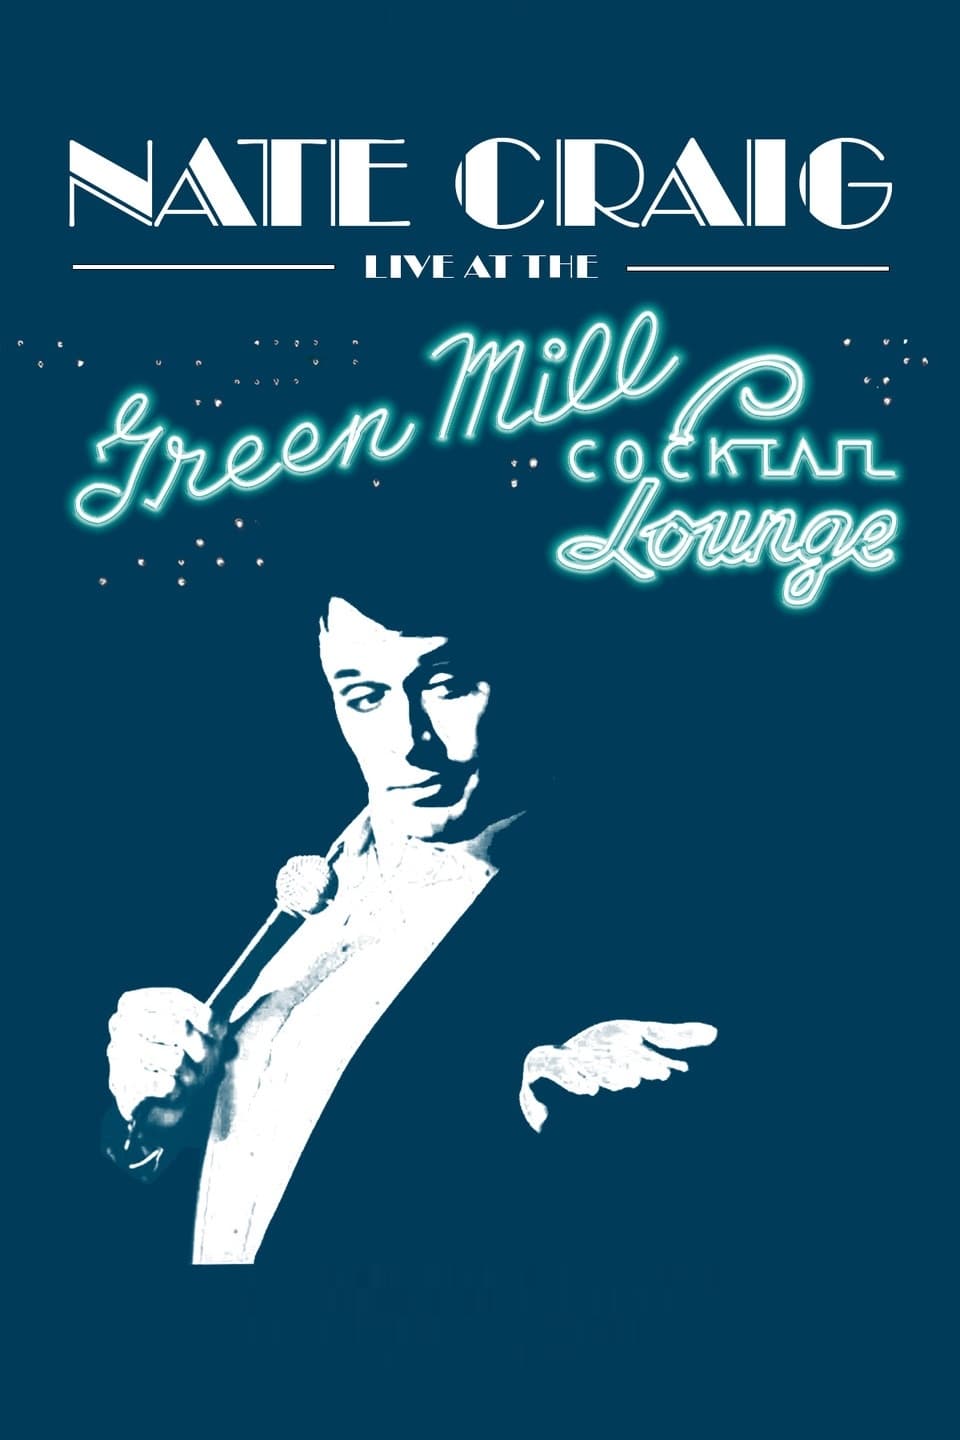 Nate Craig: Live At The Green Mill